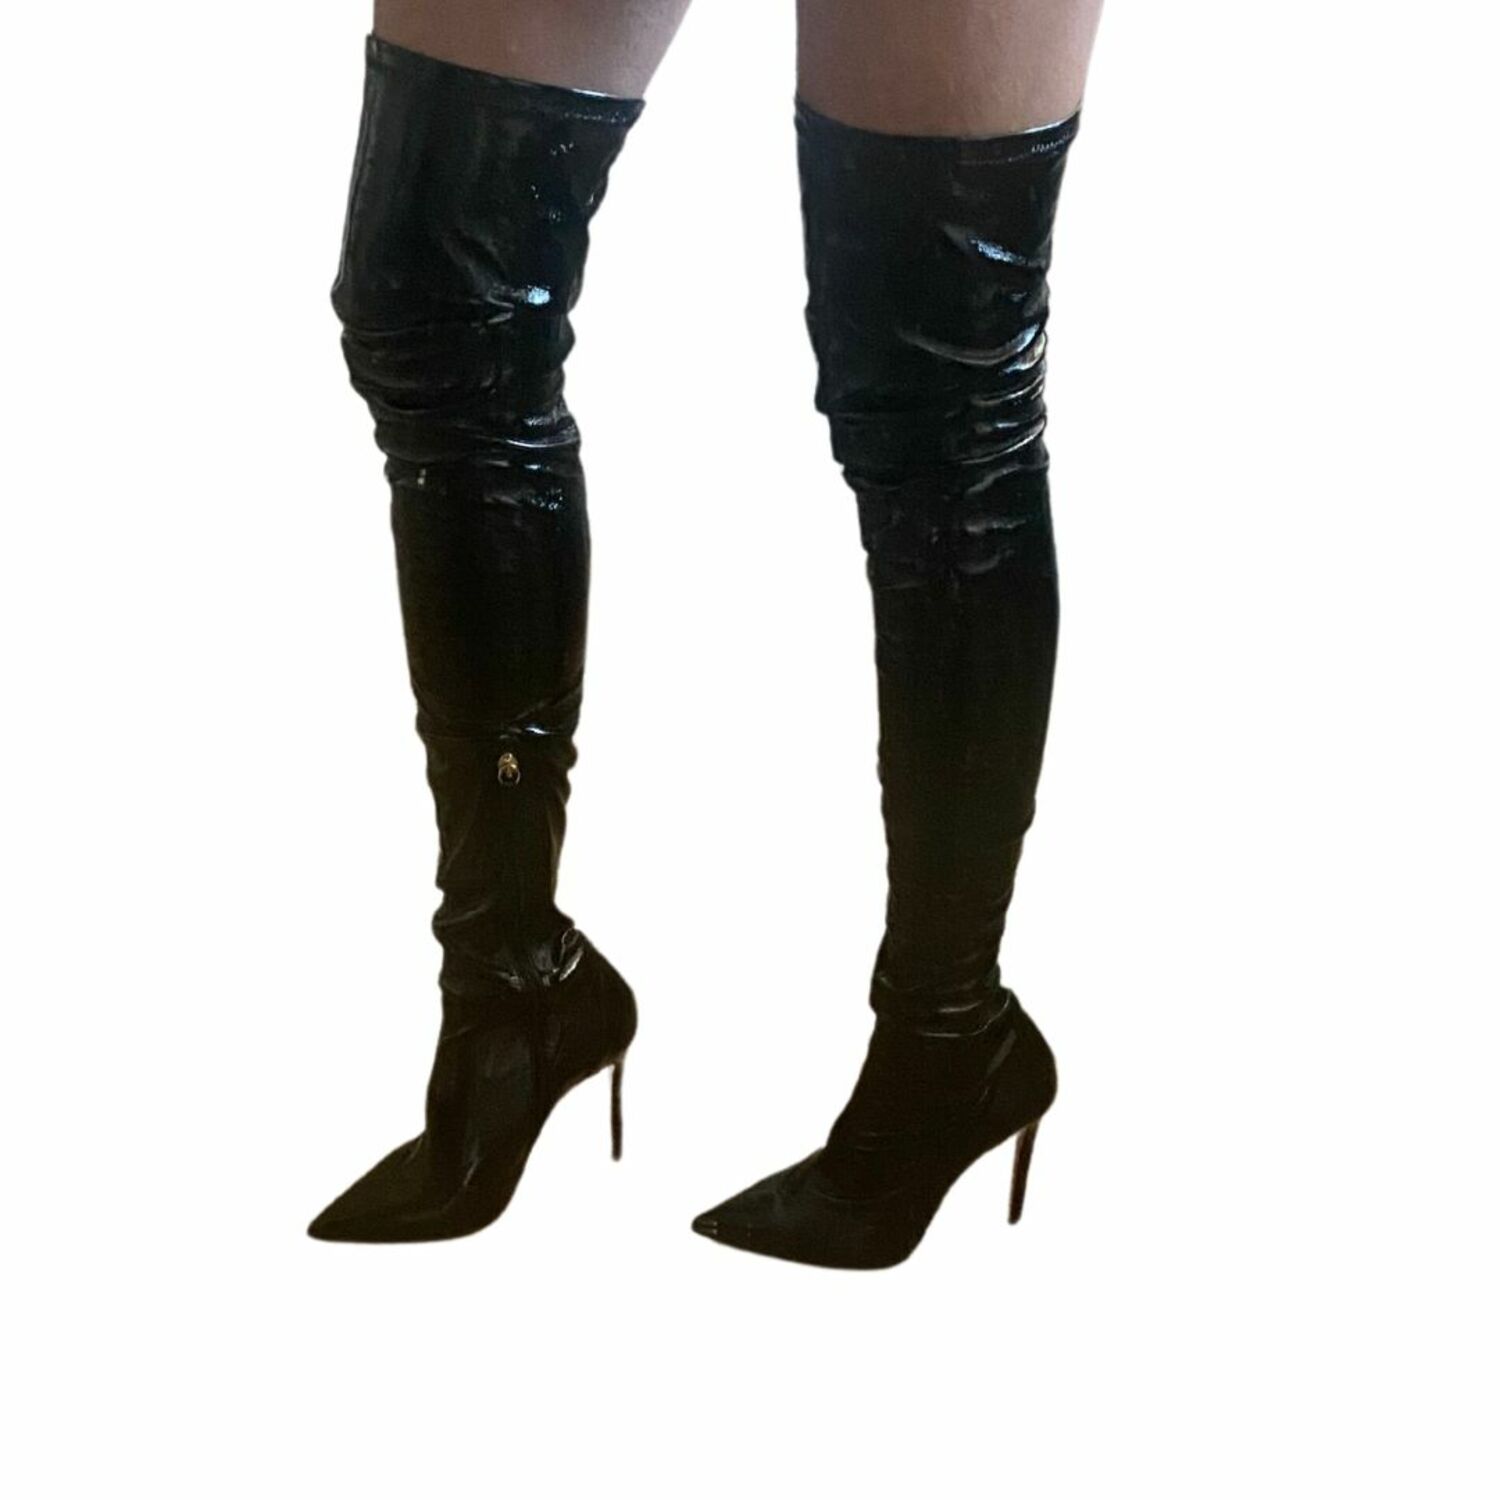 Patent Knee high Boots